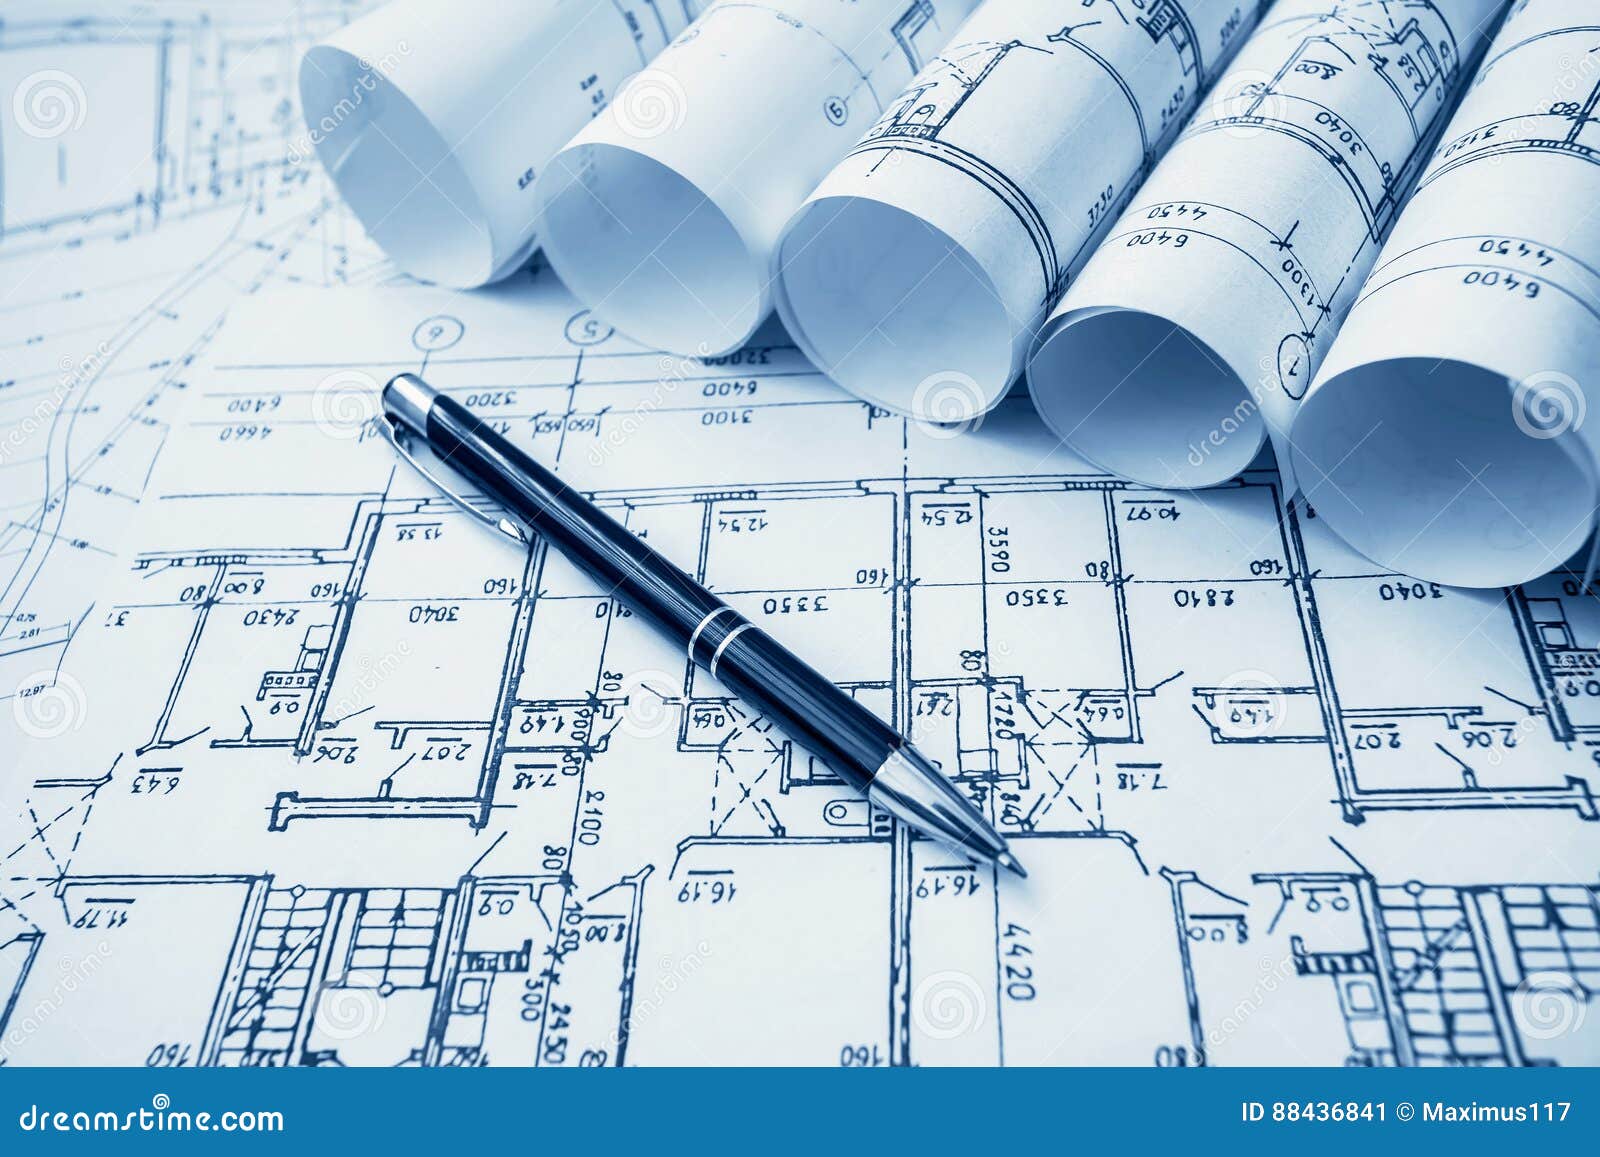 Architectural Project Blueprints Blueprin Stock Image 